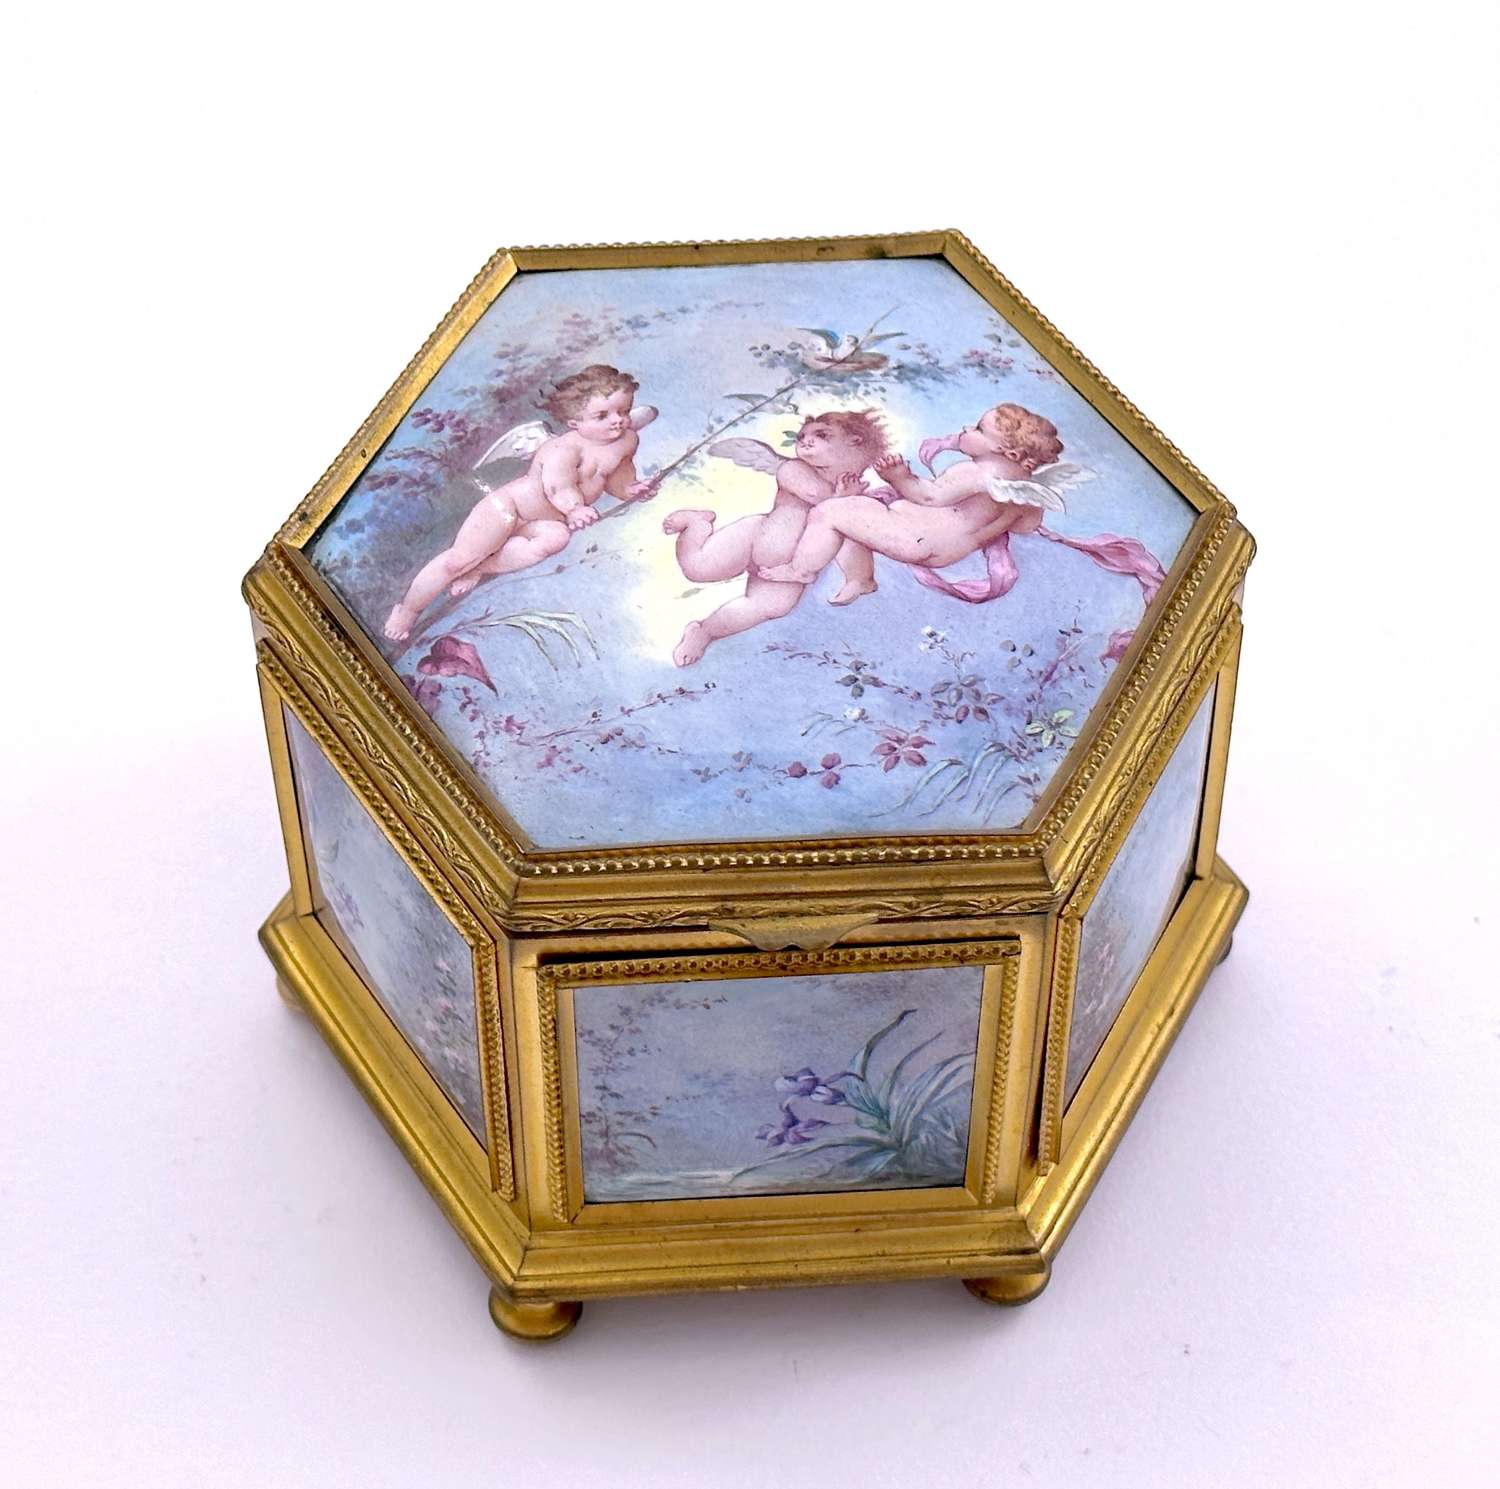 Fine Antique French Enamelled and Dore Broze Hexagonal Jewellery Box